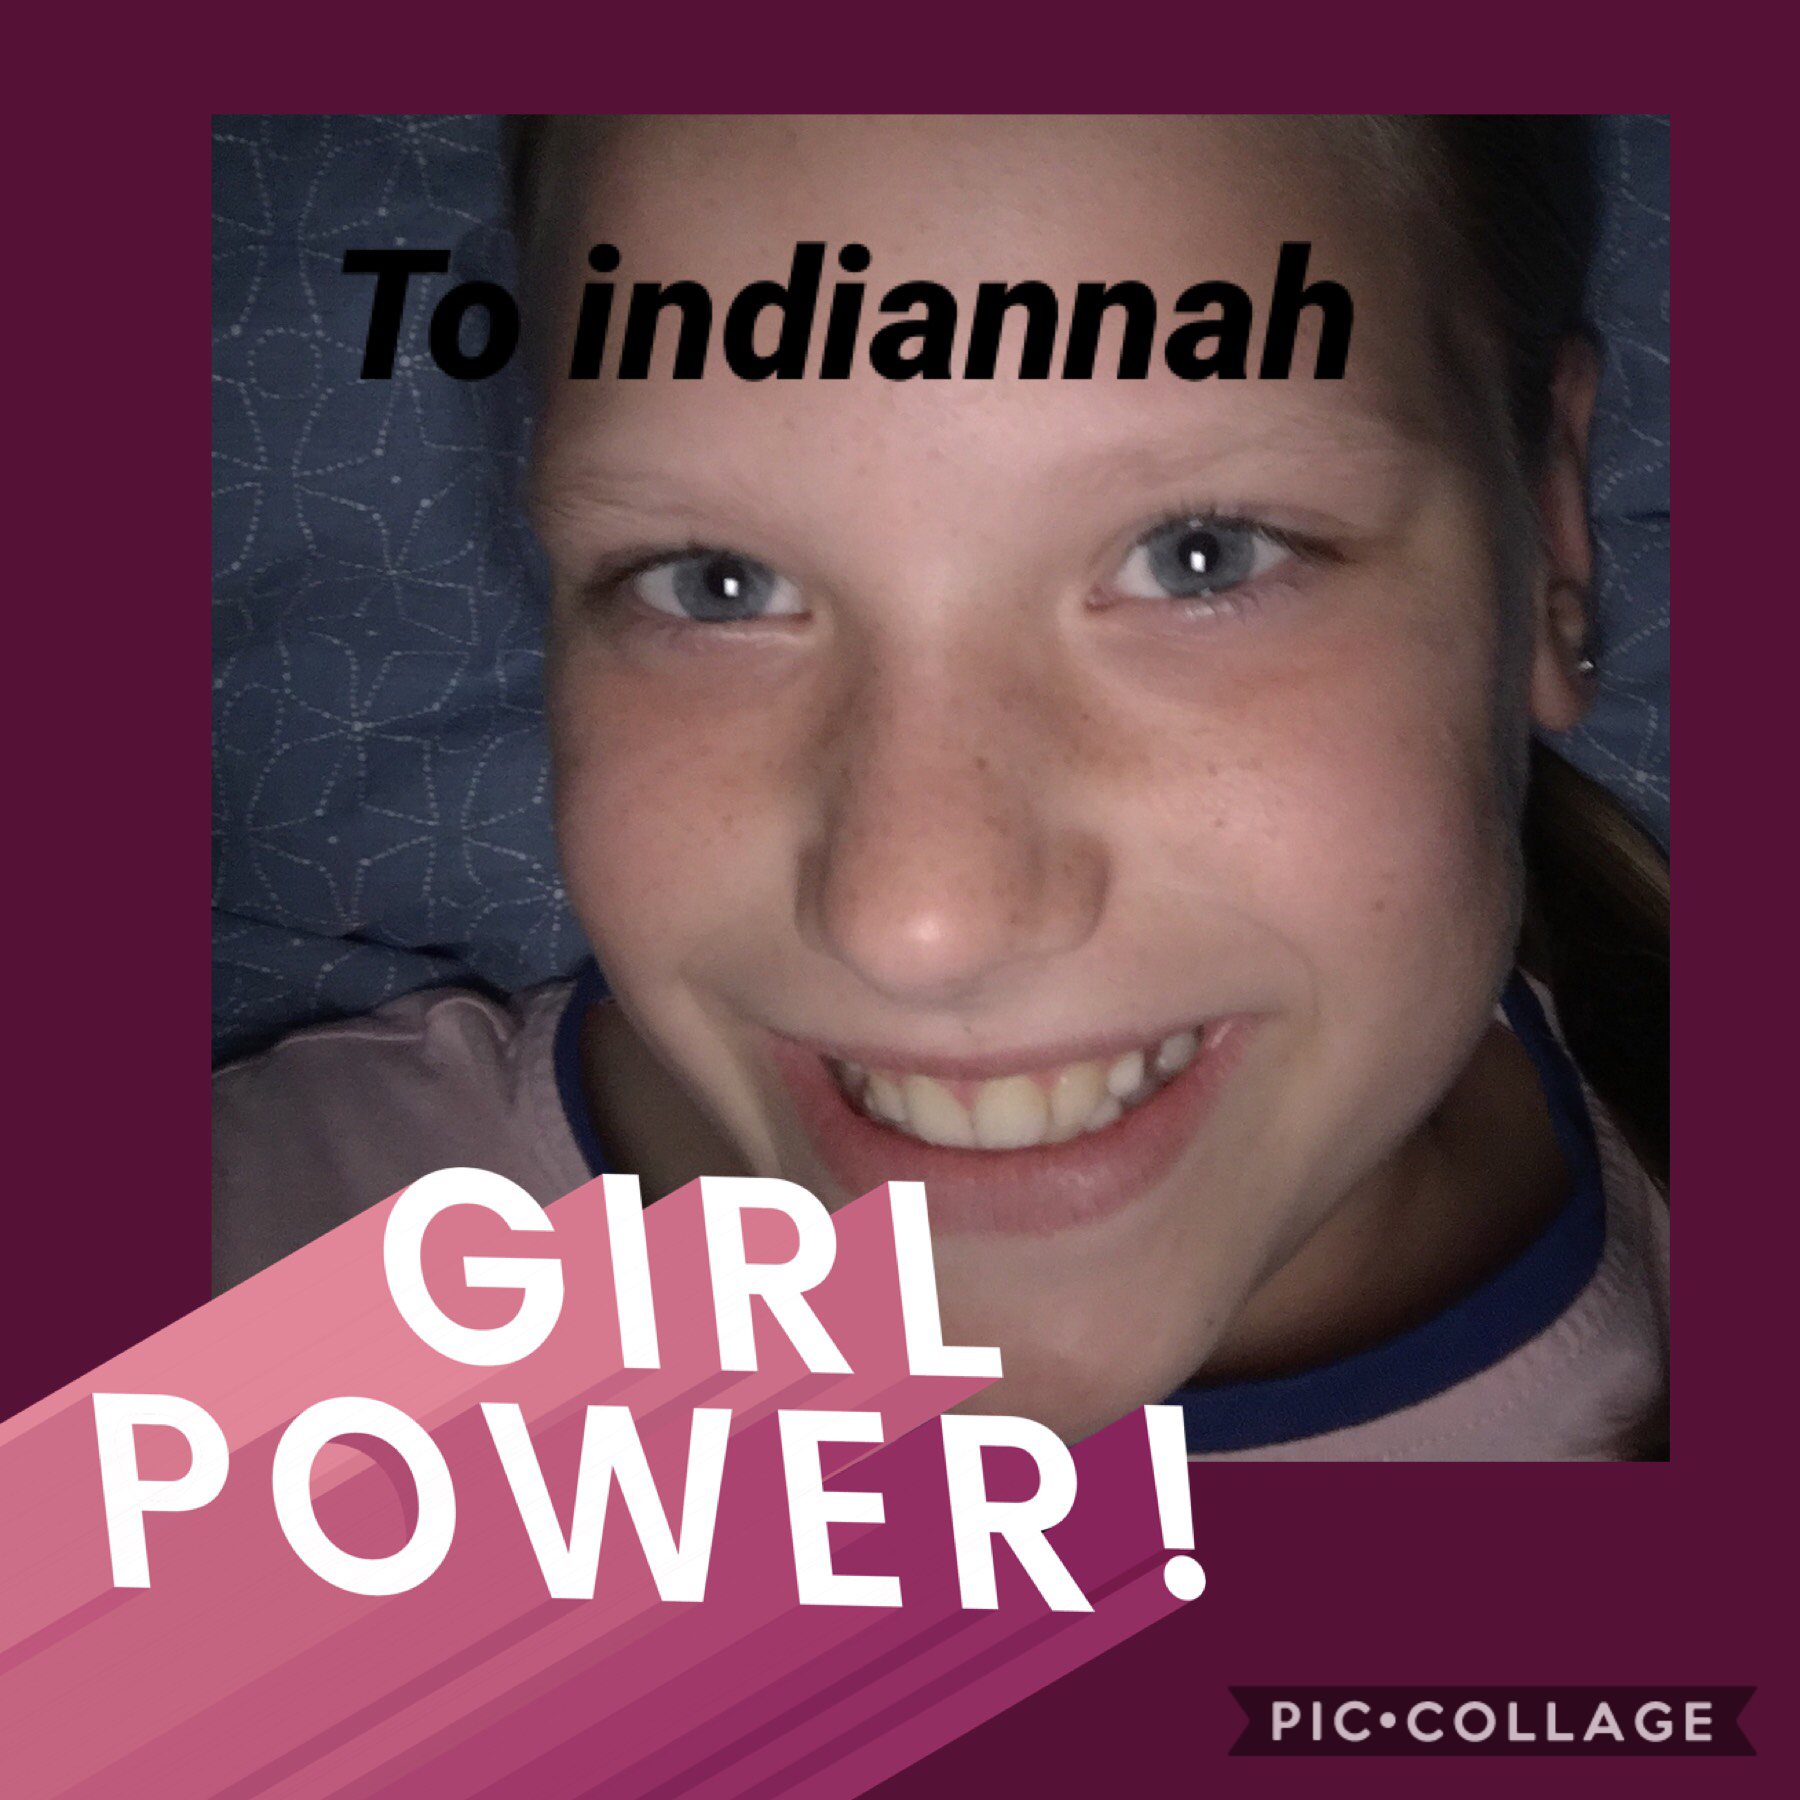 To indiannah